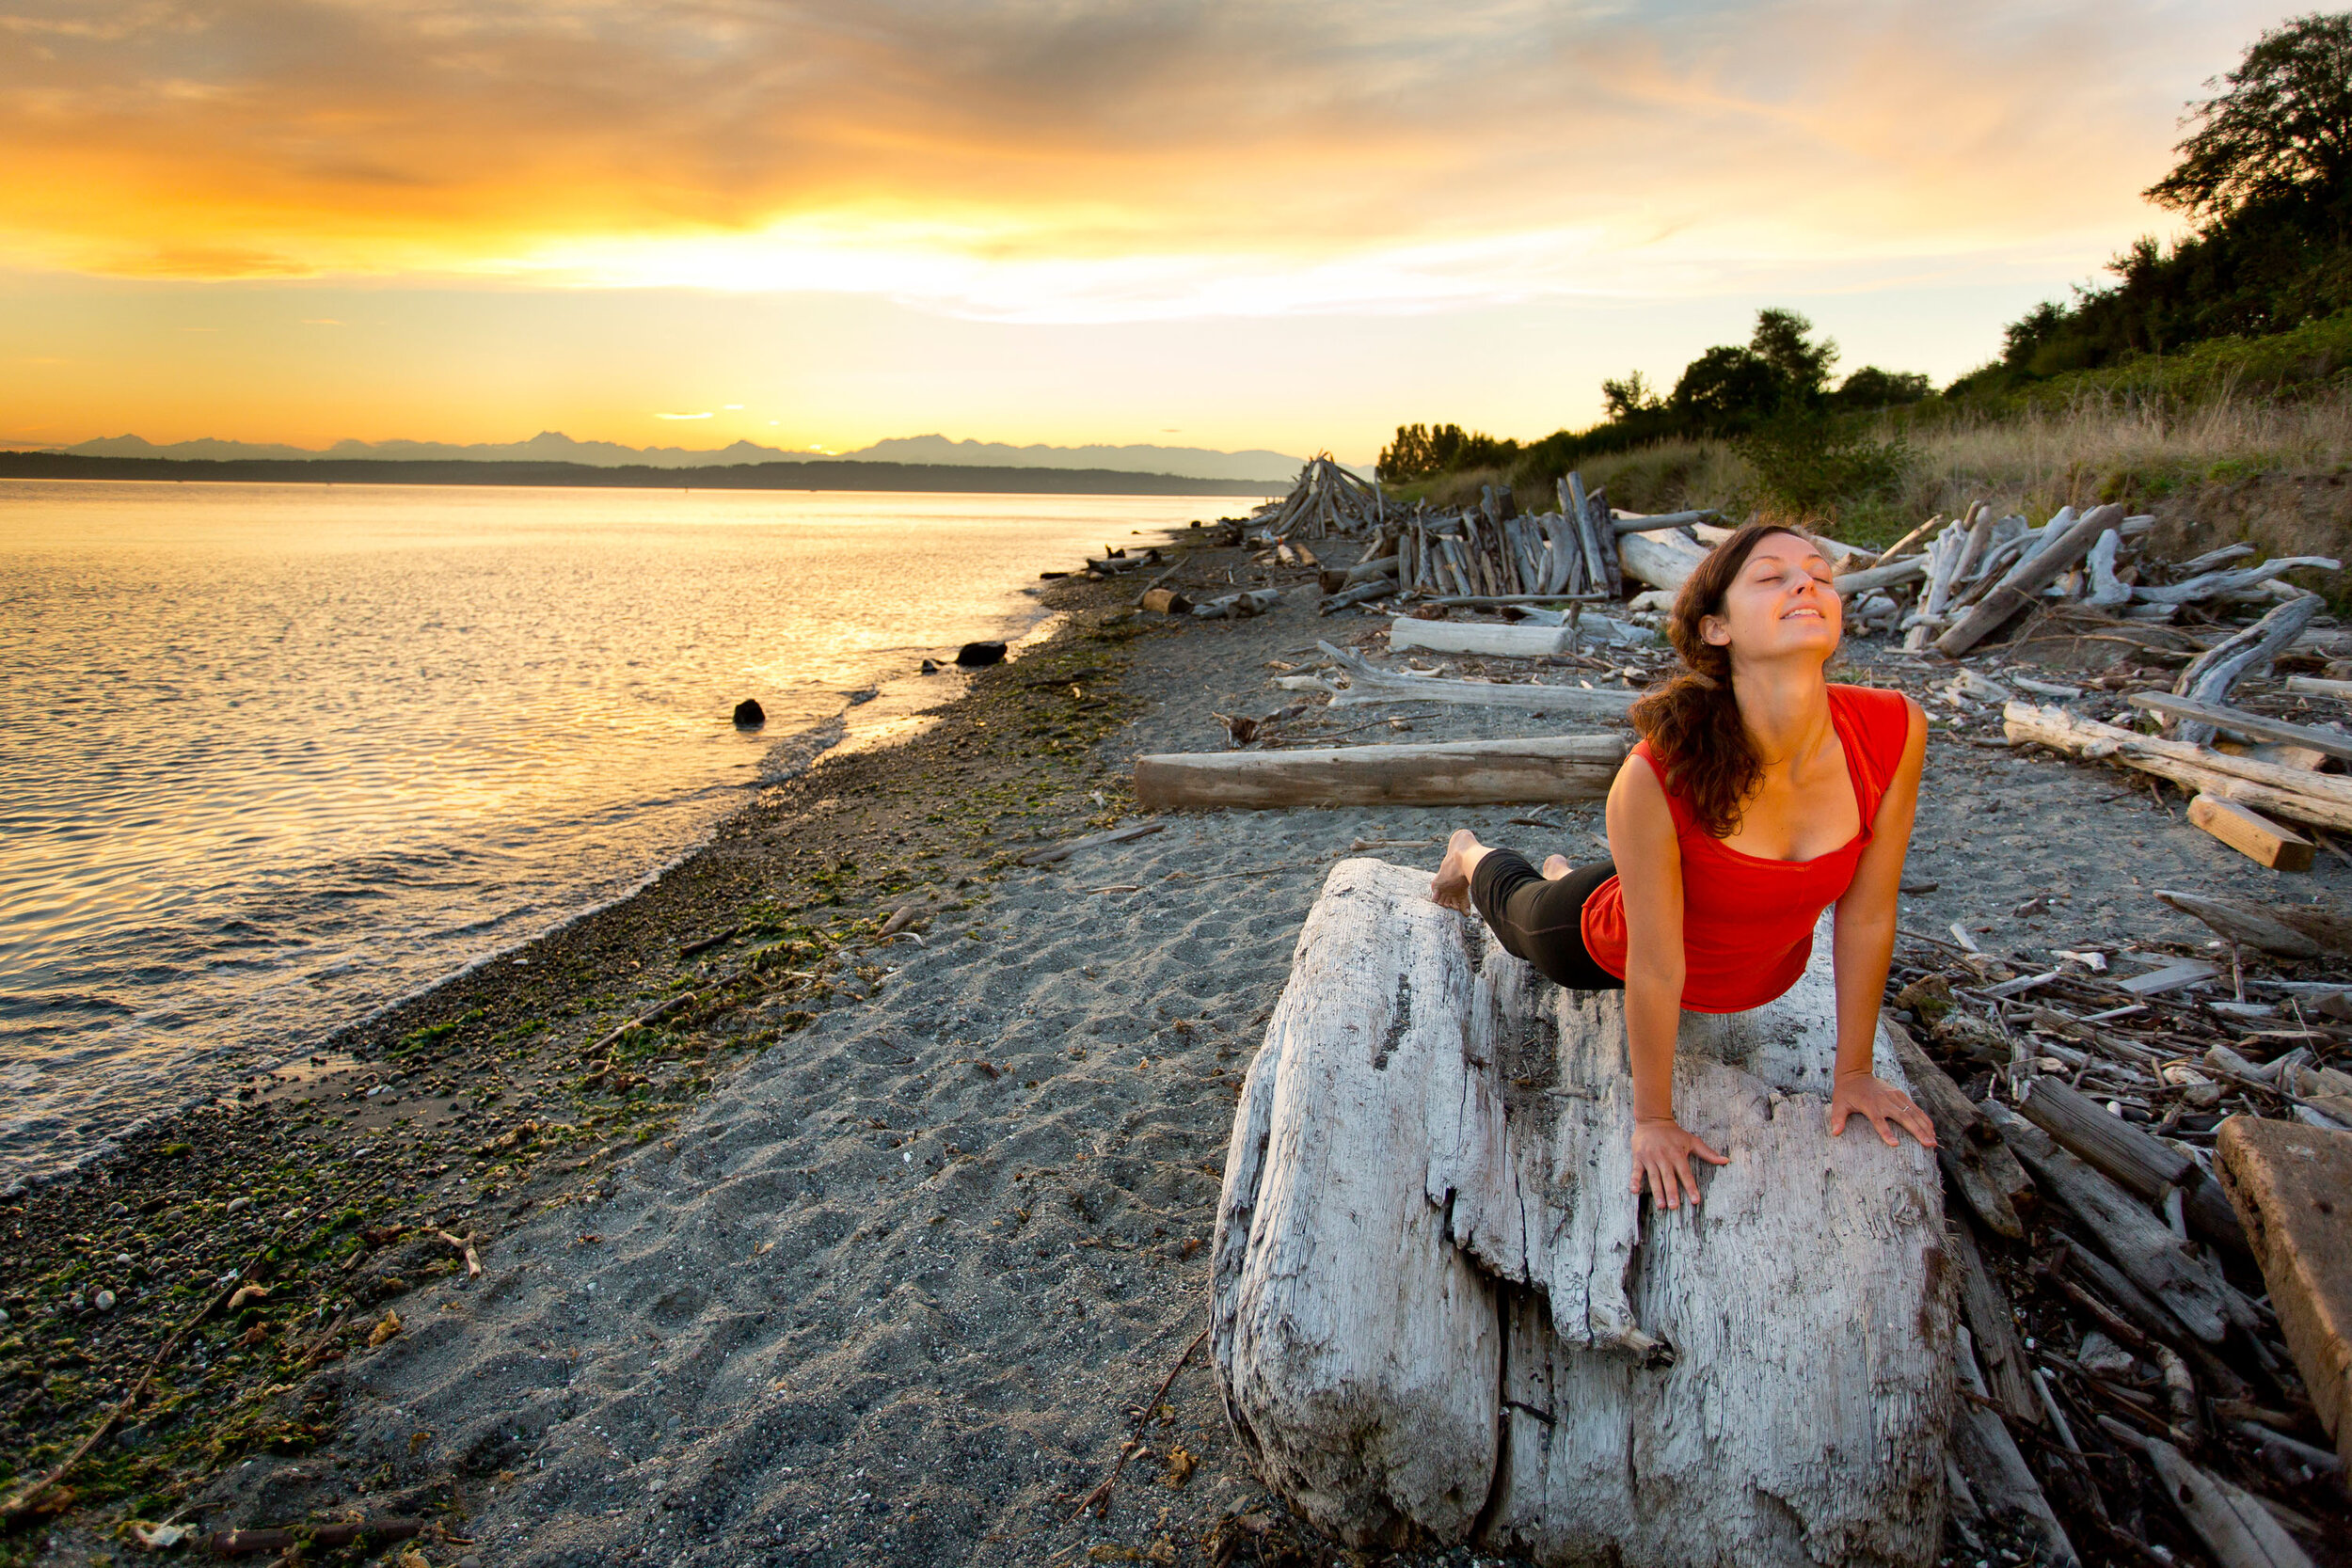  Lifestyle: Elizabeth Kovar doing yoga on the beach at Discovery Park at sunset, Seattle 